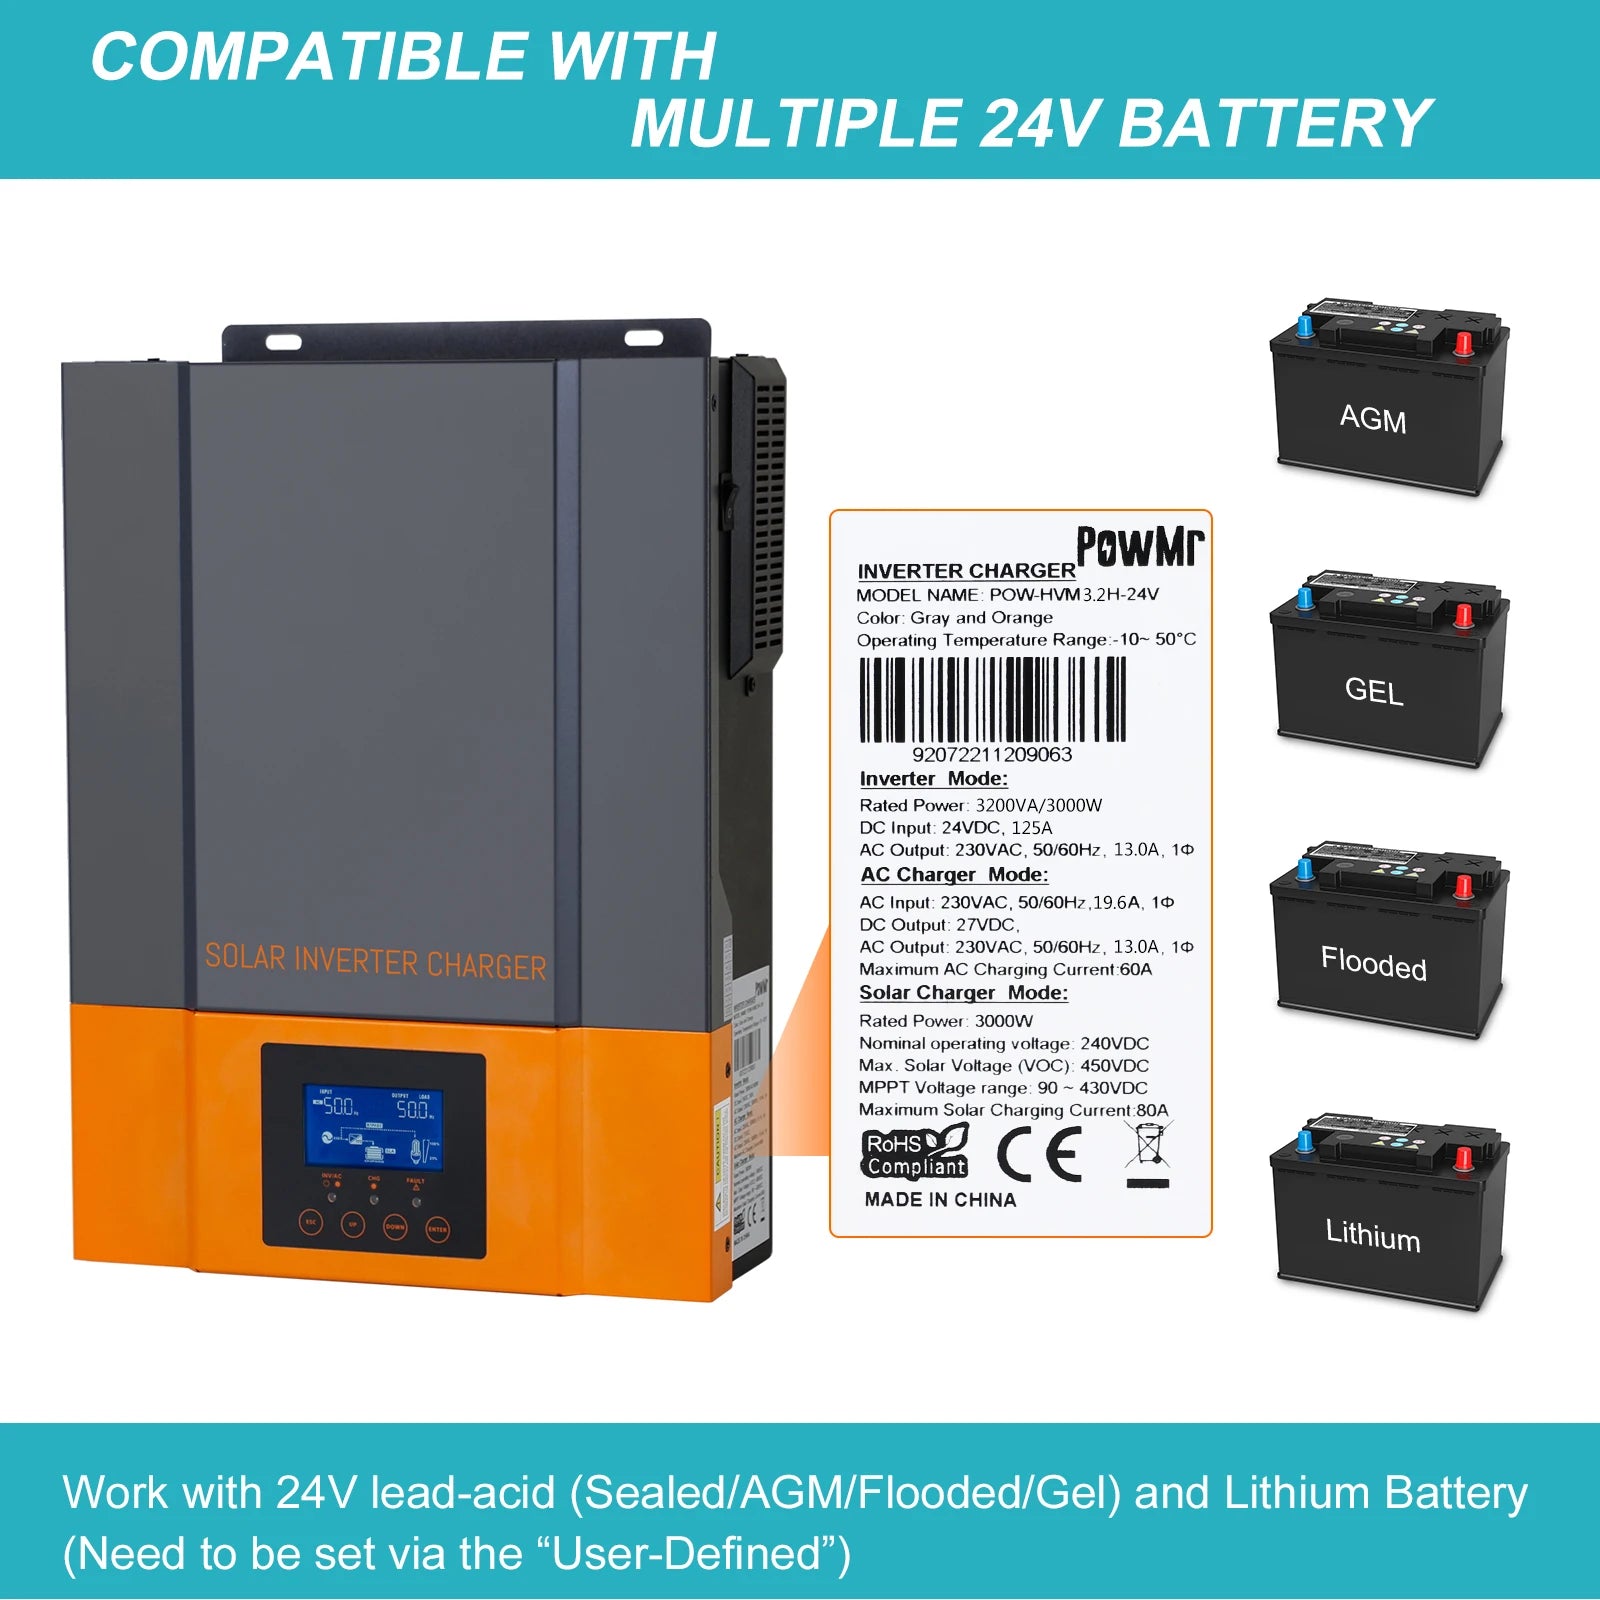 PowMr 3.2KW Hybrid Solar Inverter, Hybrid solar inverter with MPPT charge controller for photovoltaic systems, outputting 3.2kW at 230V.